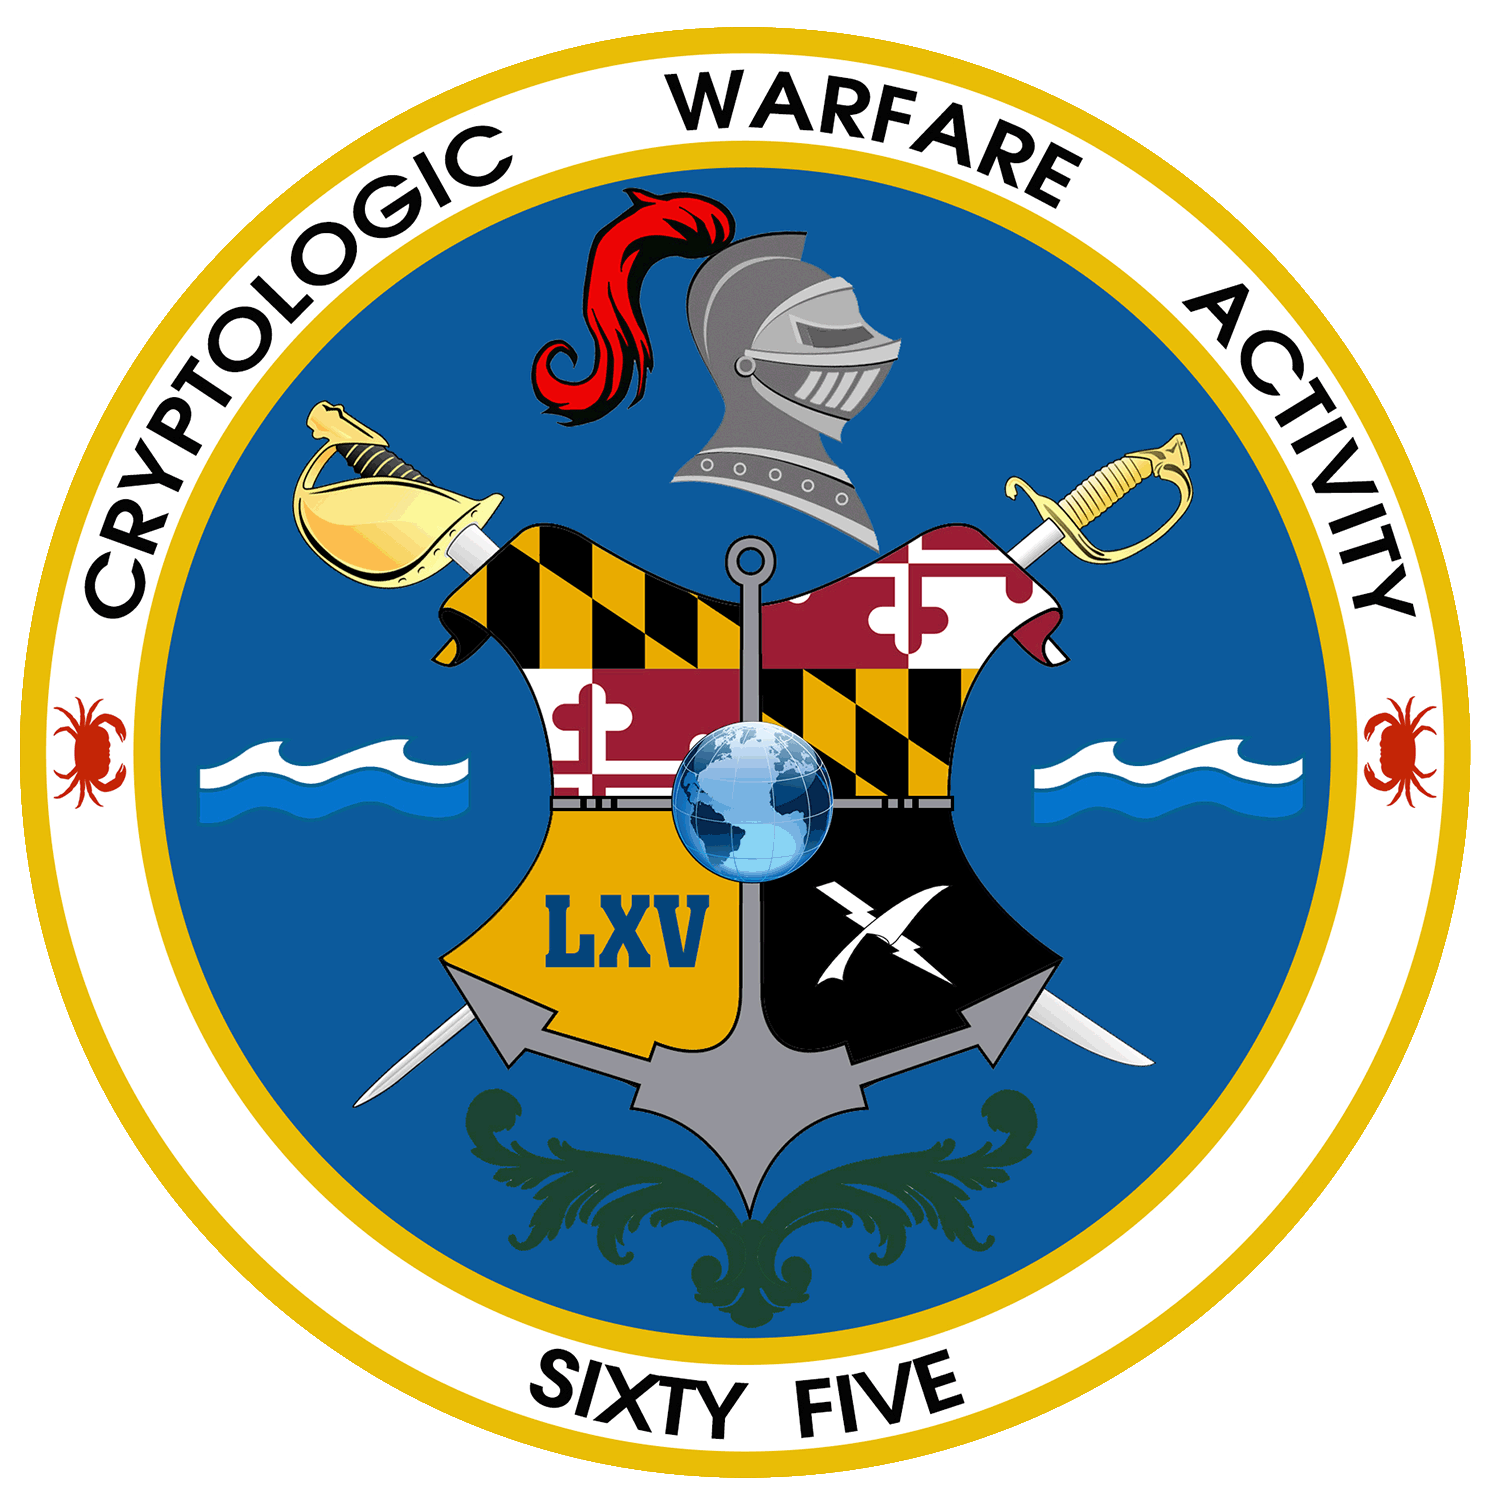 Official Twitter page of Cryptologic Warfare Activity SIXTY FIVE. Following, likes, shares, or retweets do not equal endorsement. #NavyCyber #InformationWarfare